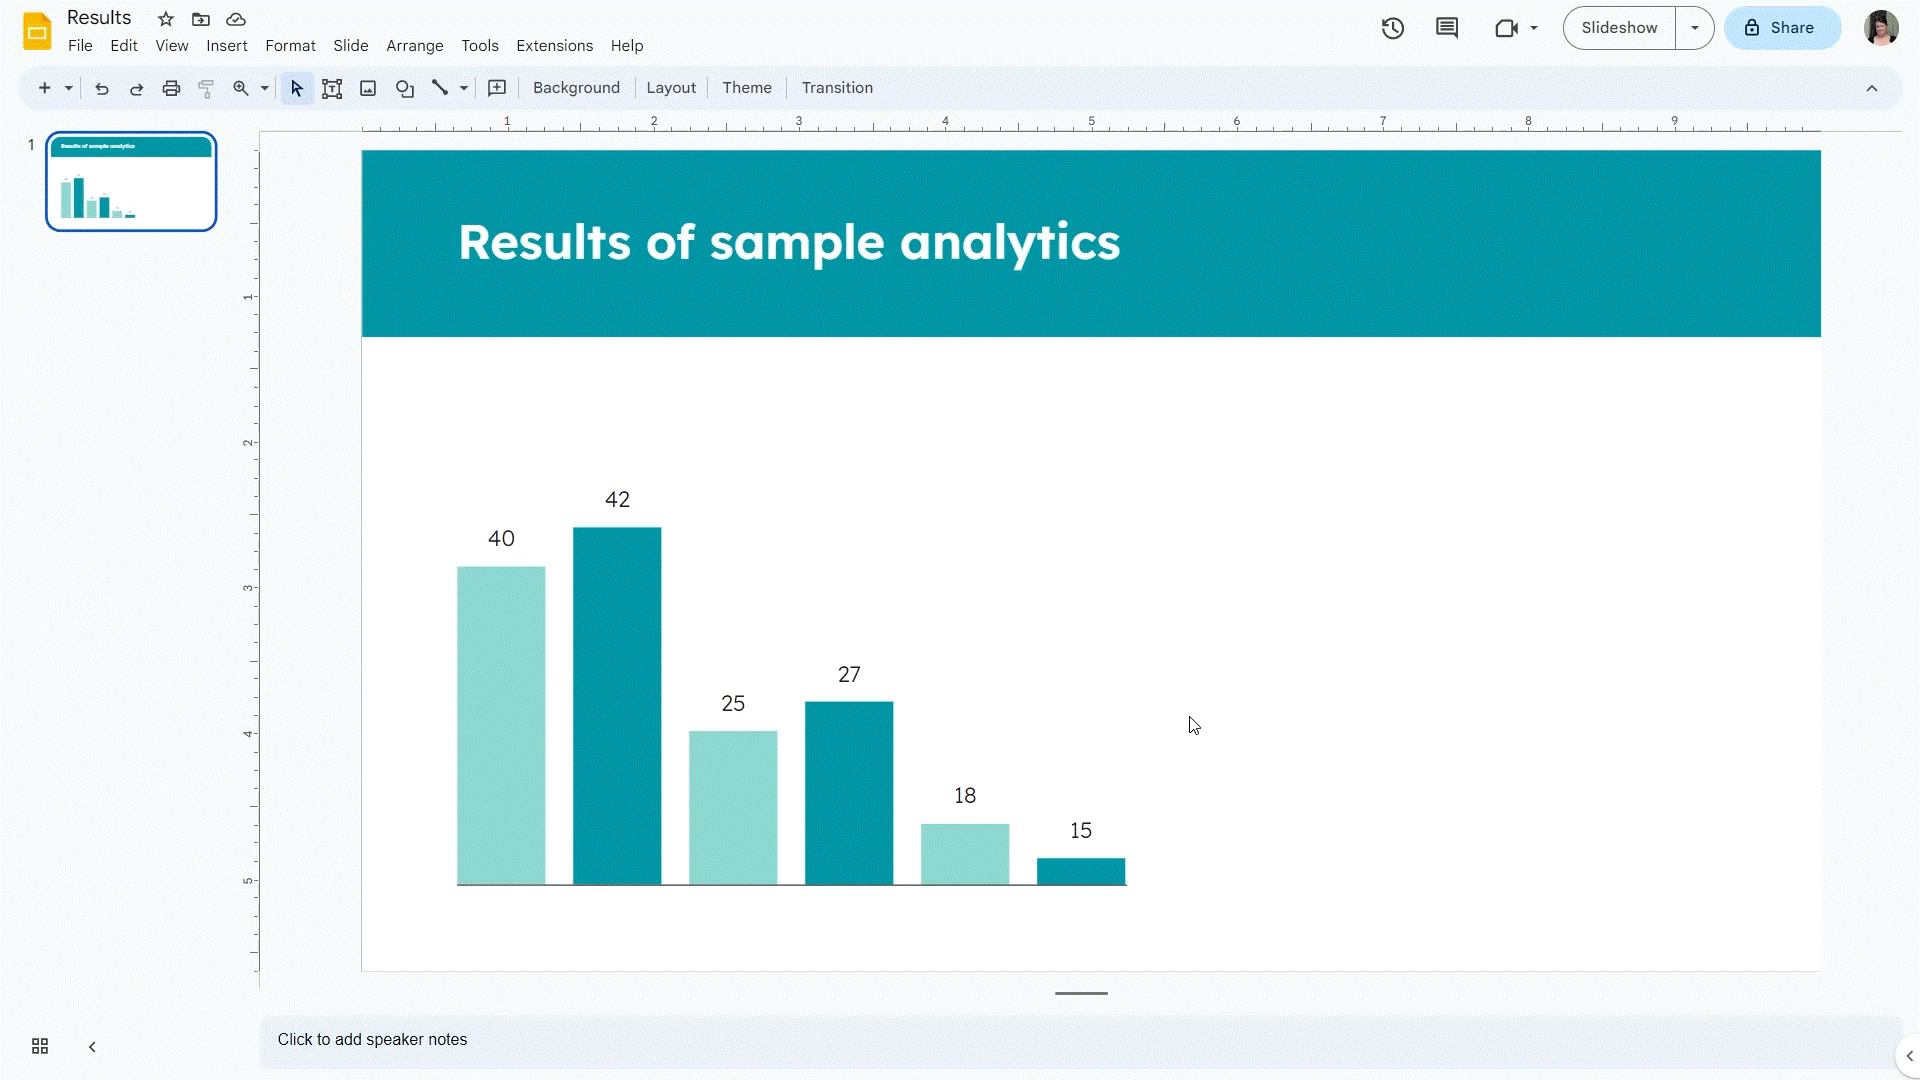 Gif of the grouping keyboard shortcut (Ctrl + Alt + G) being used on a graph in Google Slides